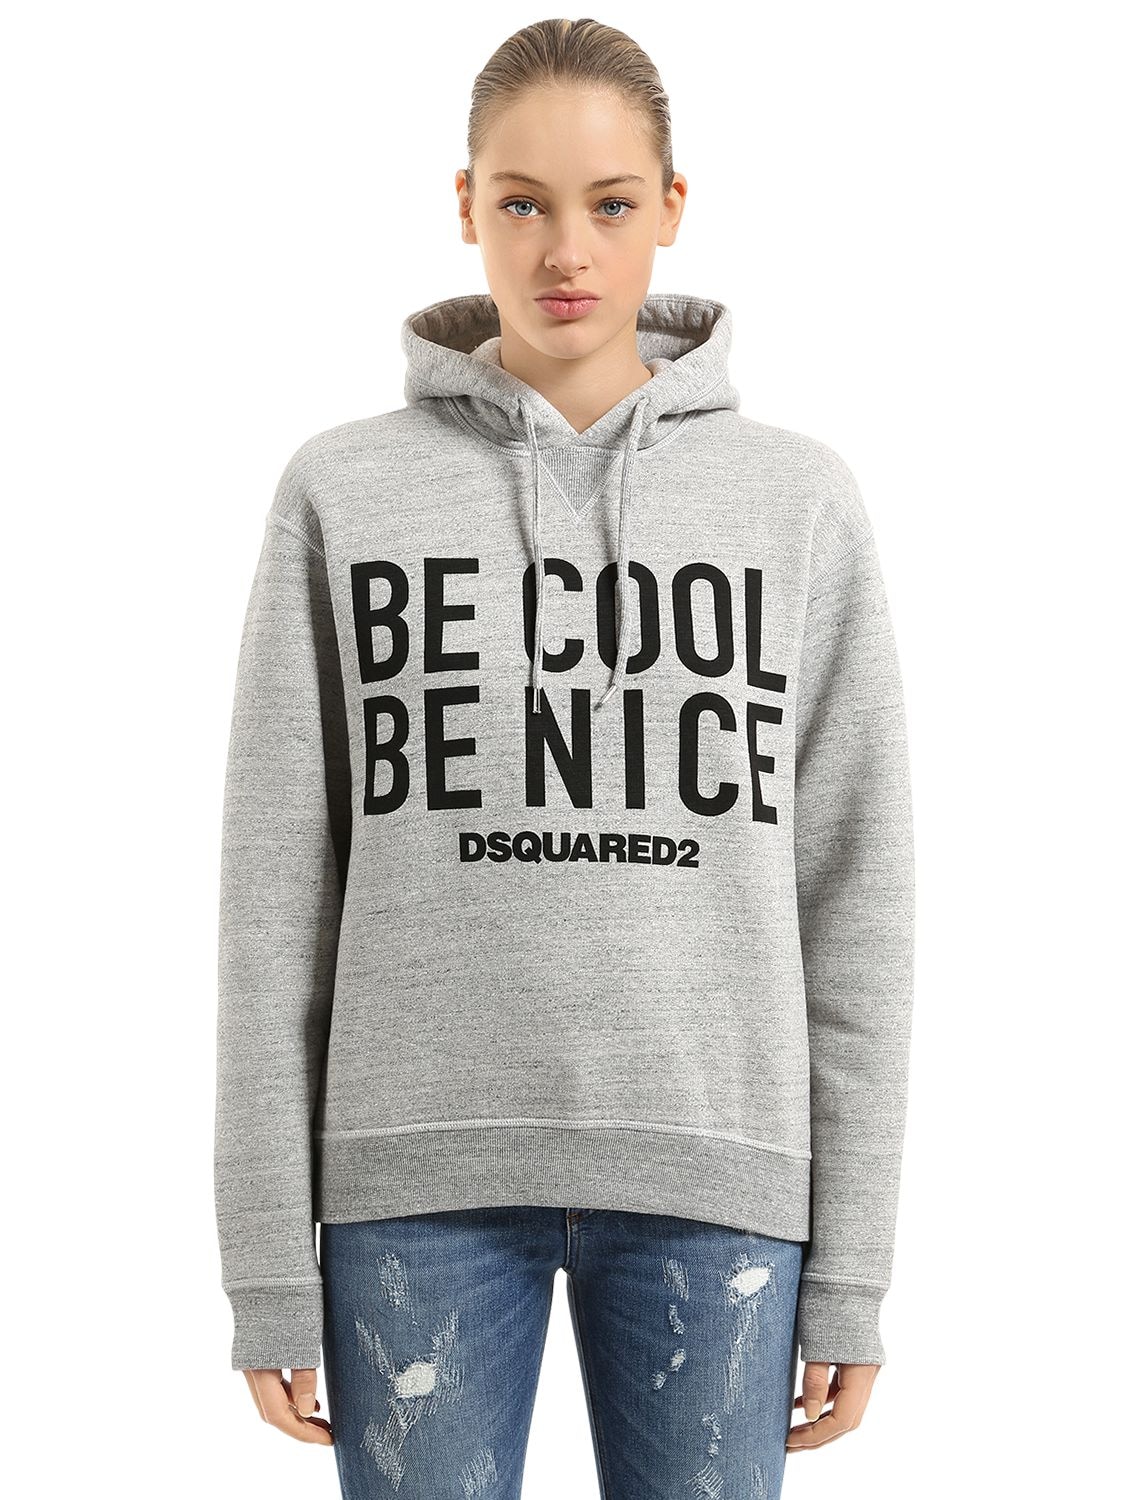 DSQUARED2 BE COOL BE NICE HOODED JERSEY SWEATSHIRT,67IS3C001-ODU4TQ2